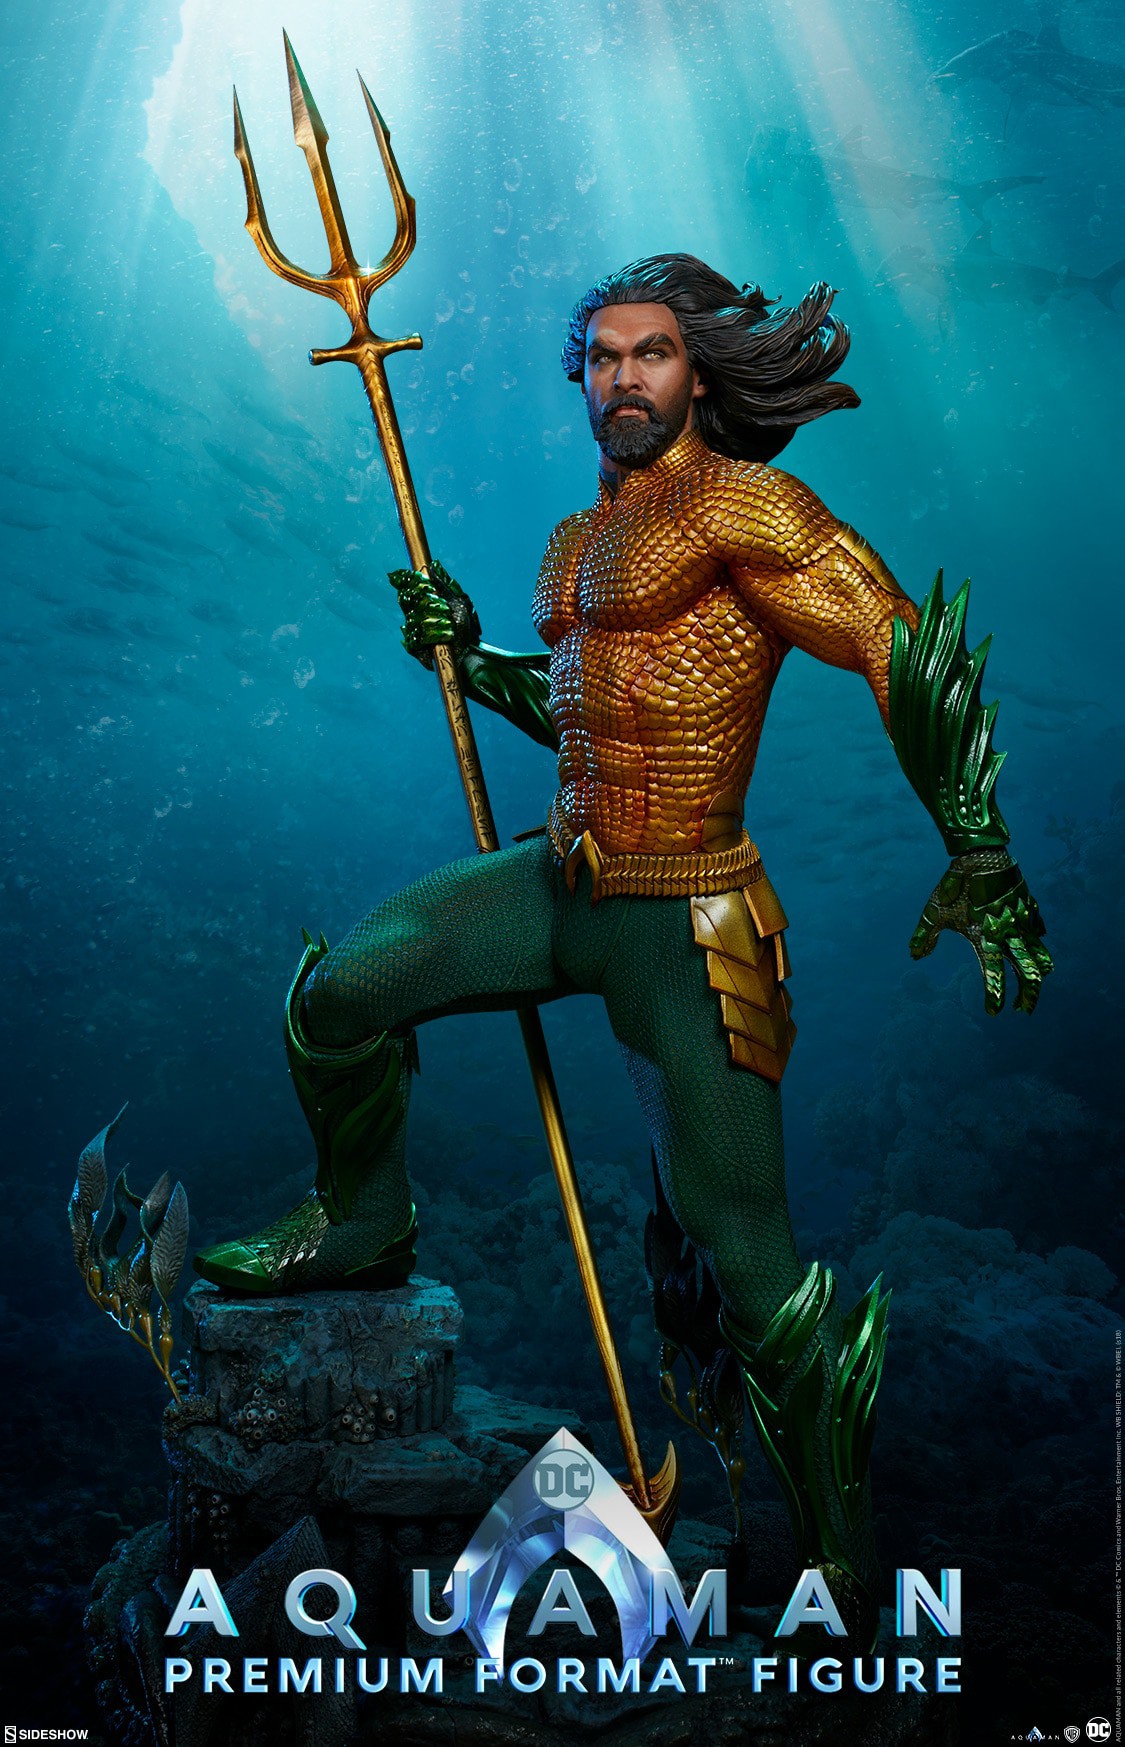 New "AQUAMAN" Behind the Scenes Trailer Gives Fans Even More Hope!